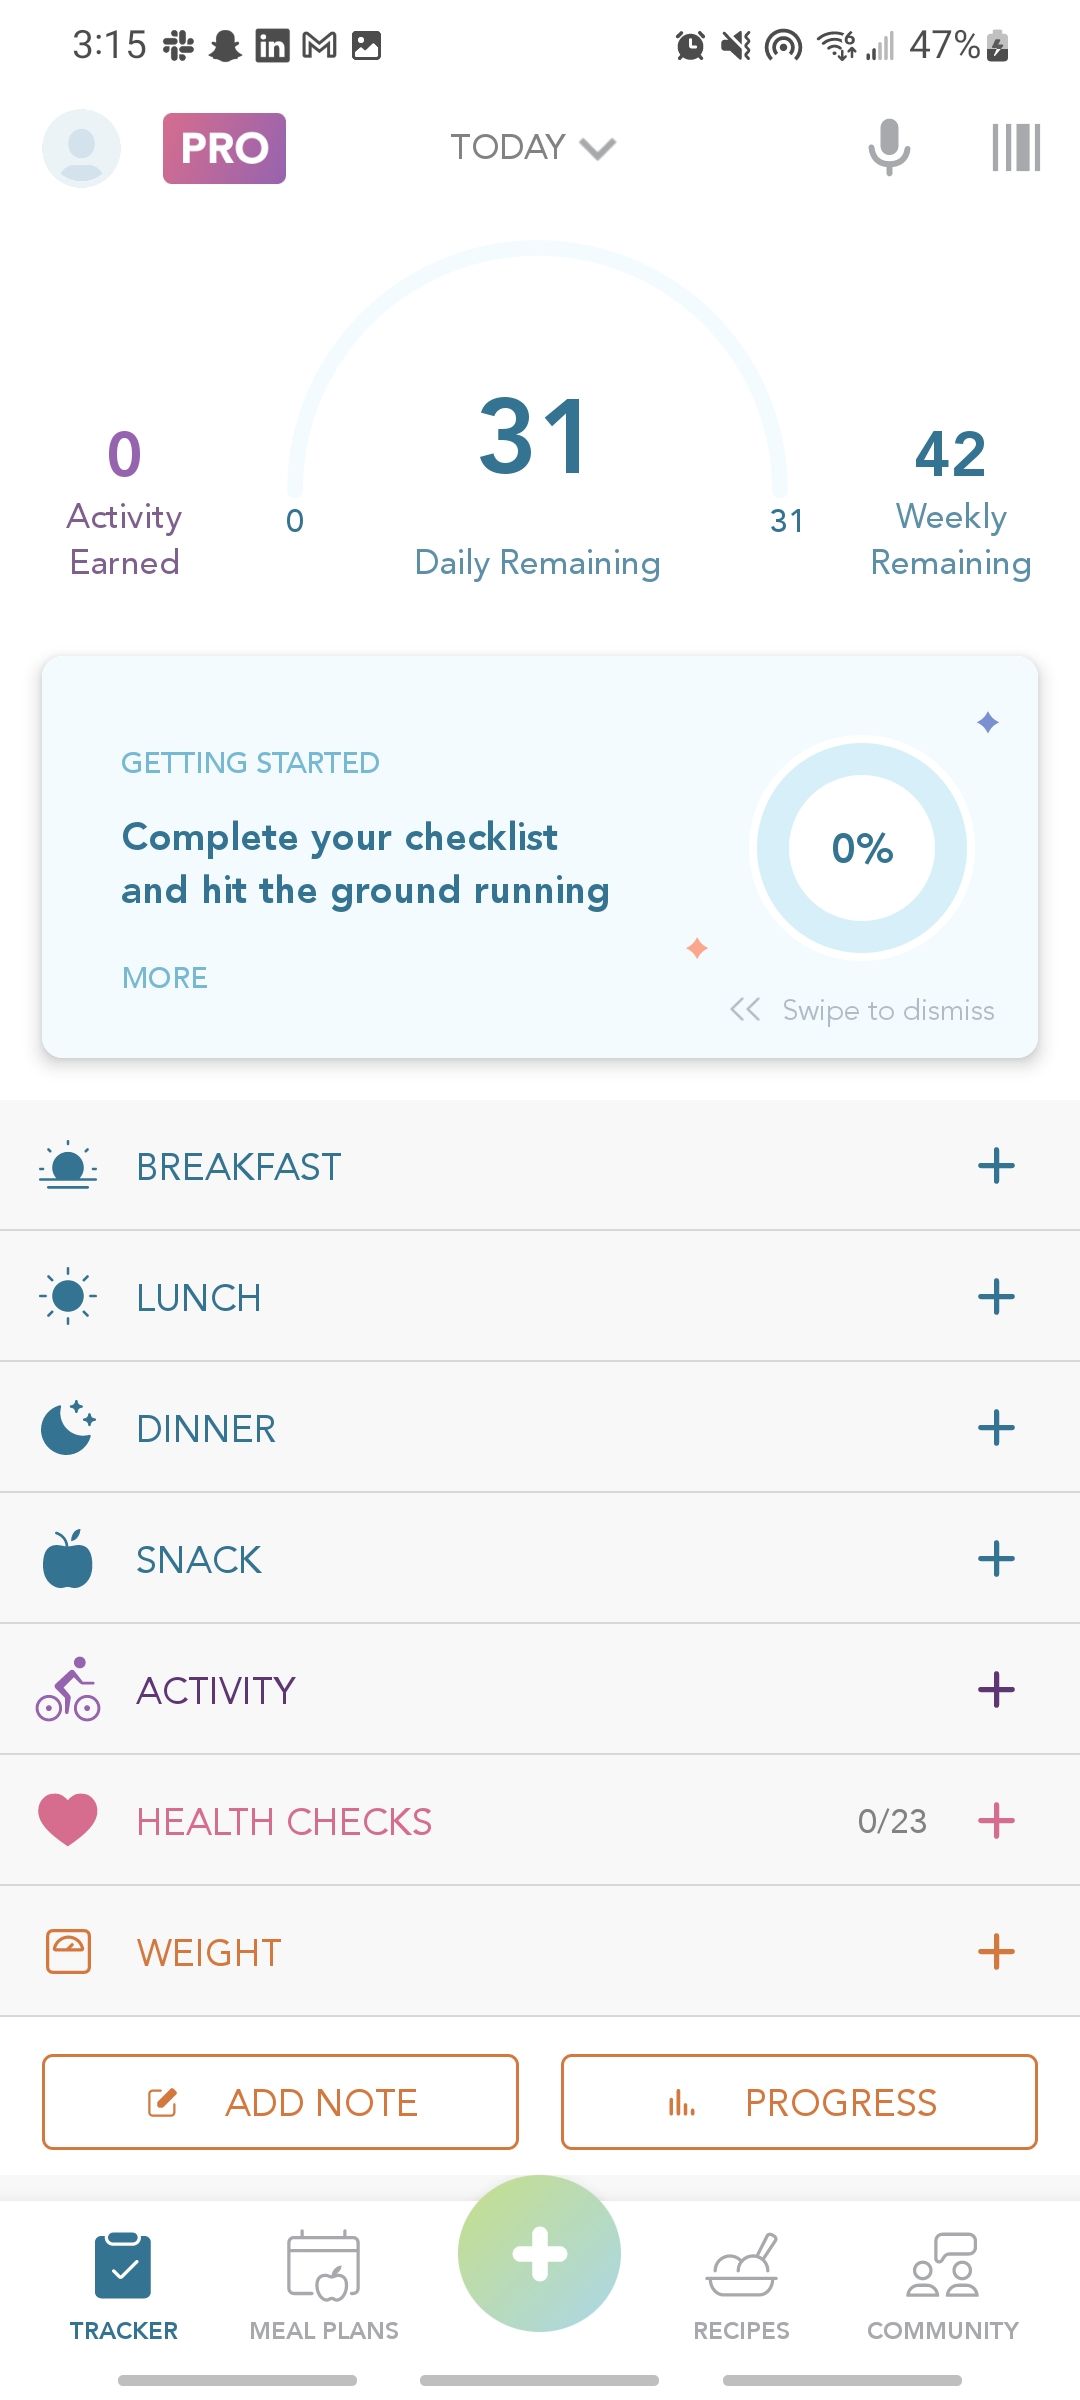 healthi app home screen with tracker